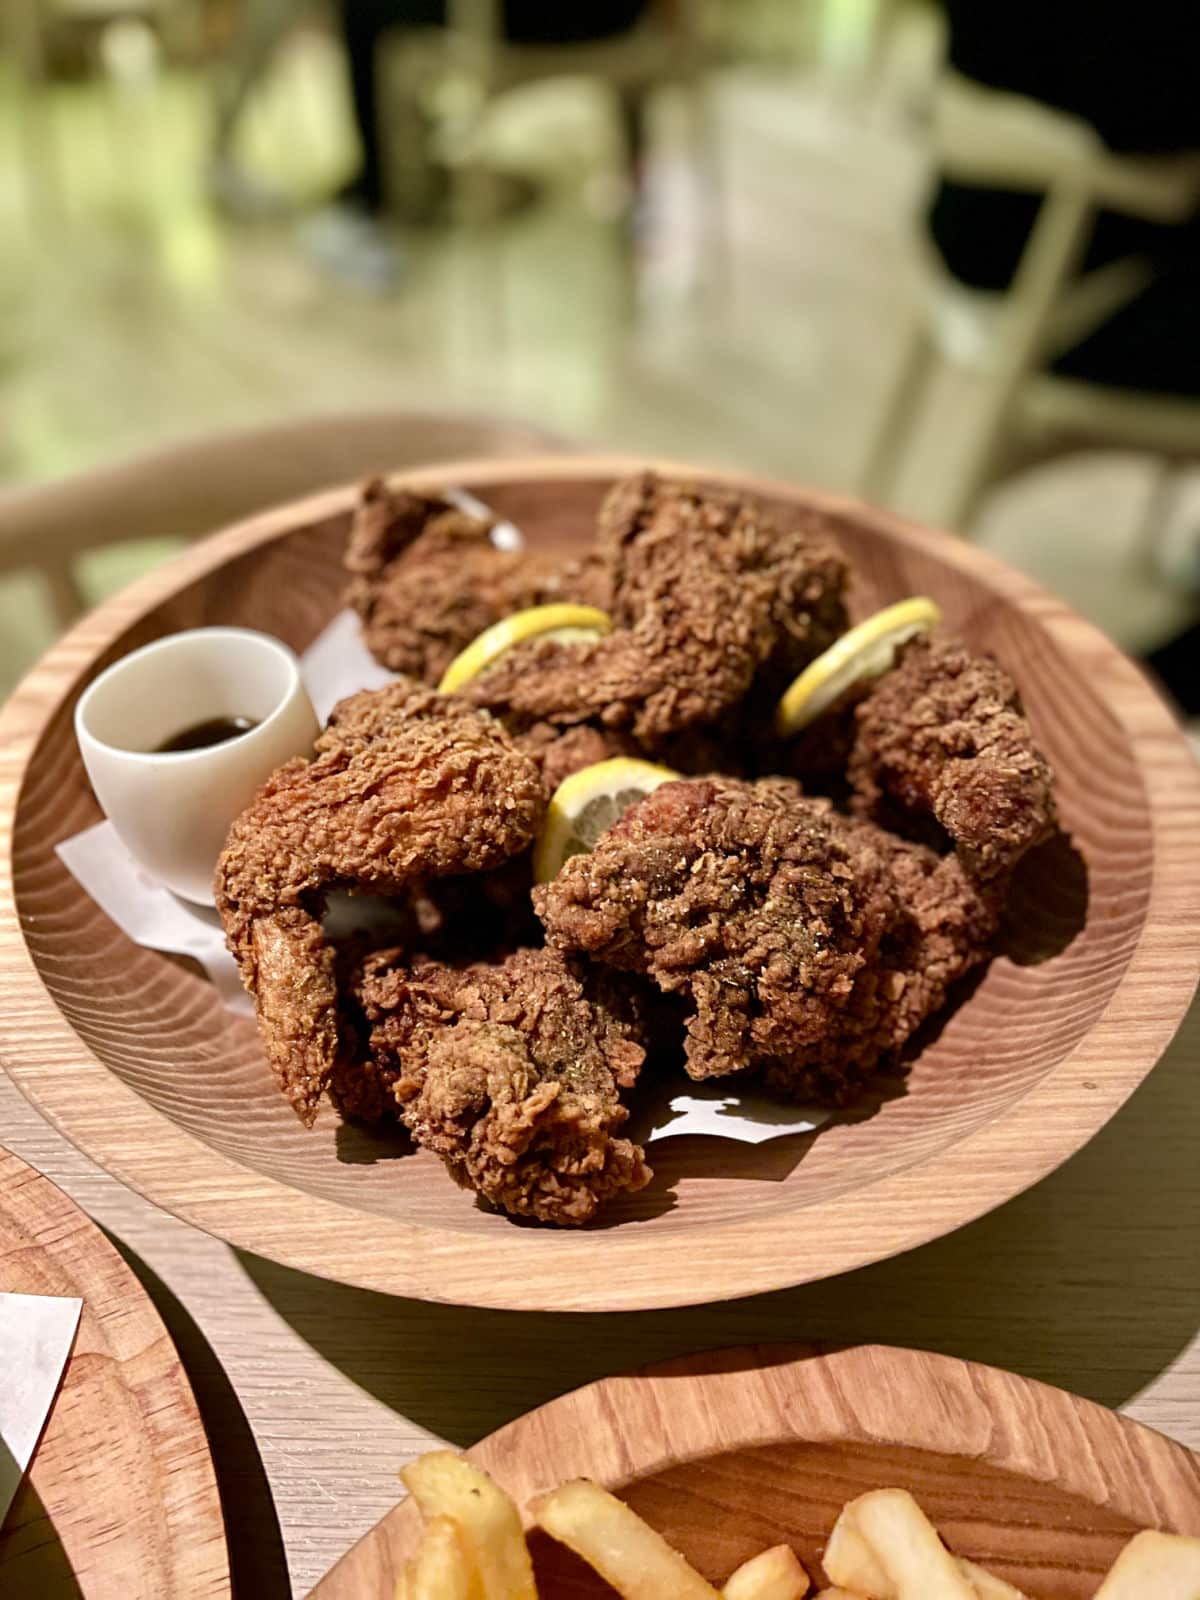 Fried chicken in a wood bowl with a dish of sauce and lemons.